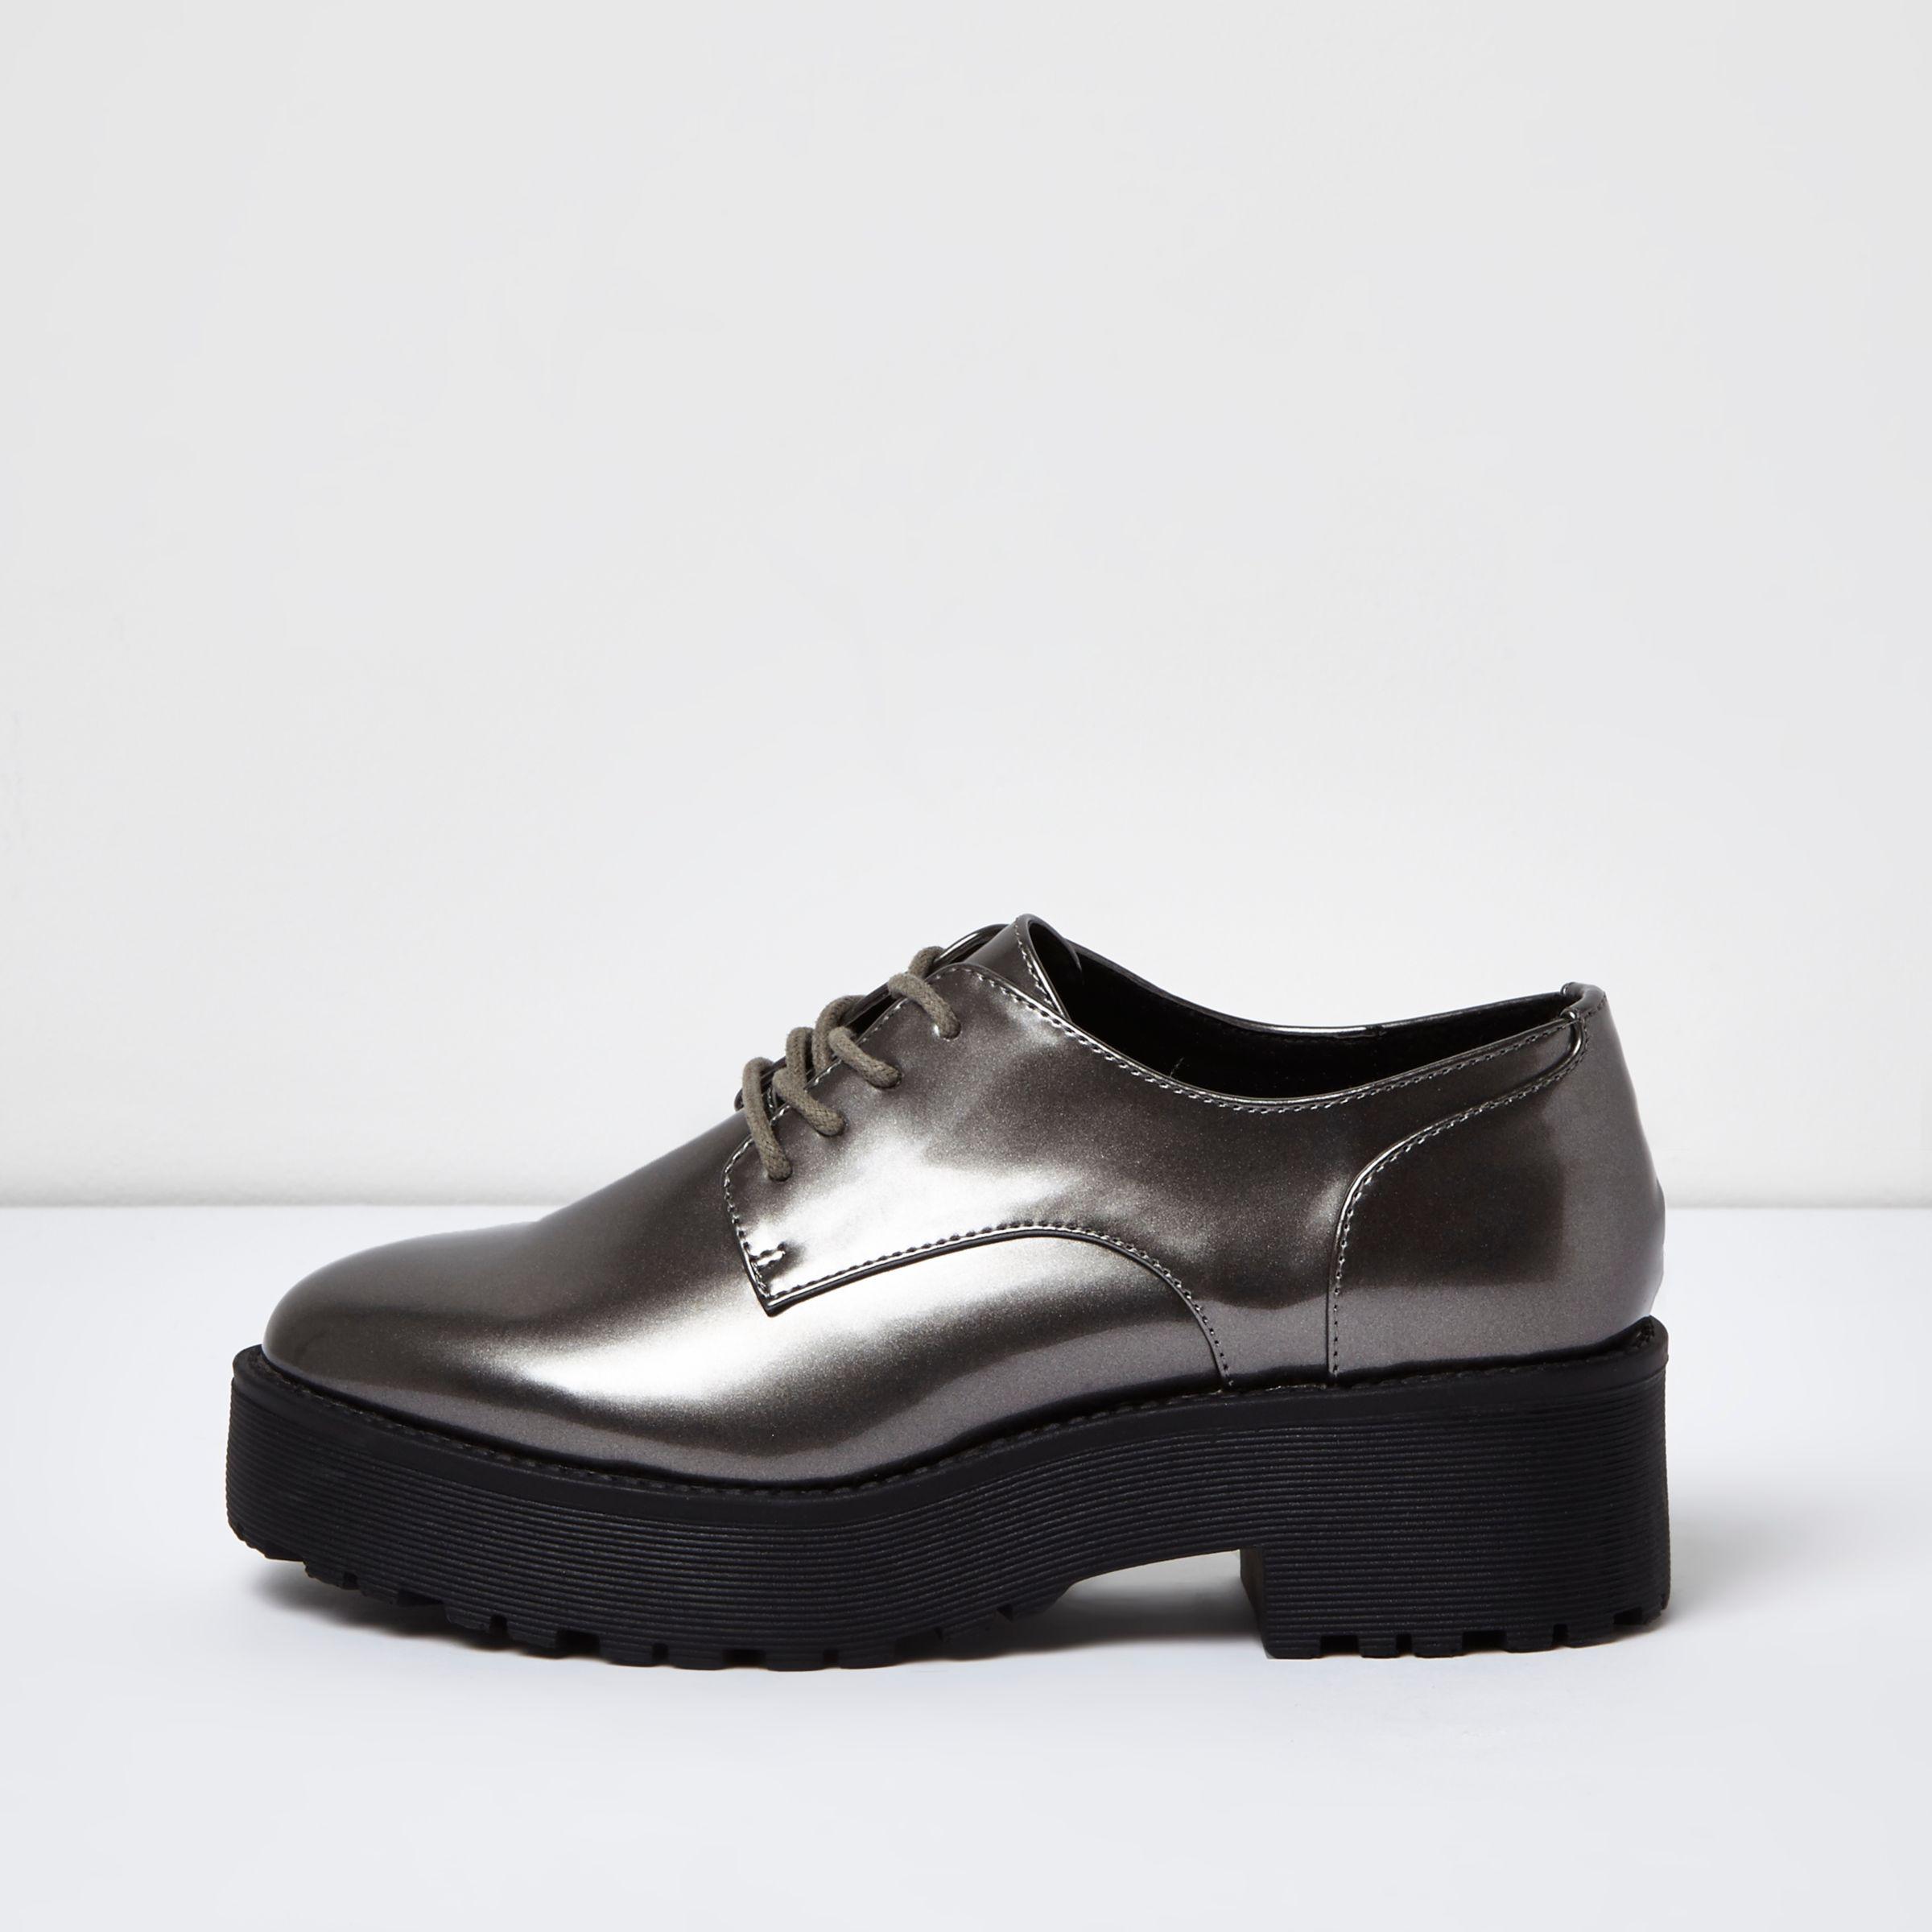 silver shoes river island